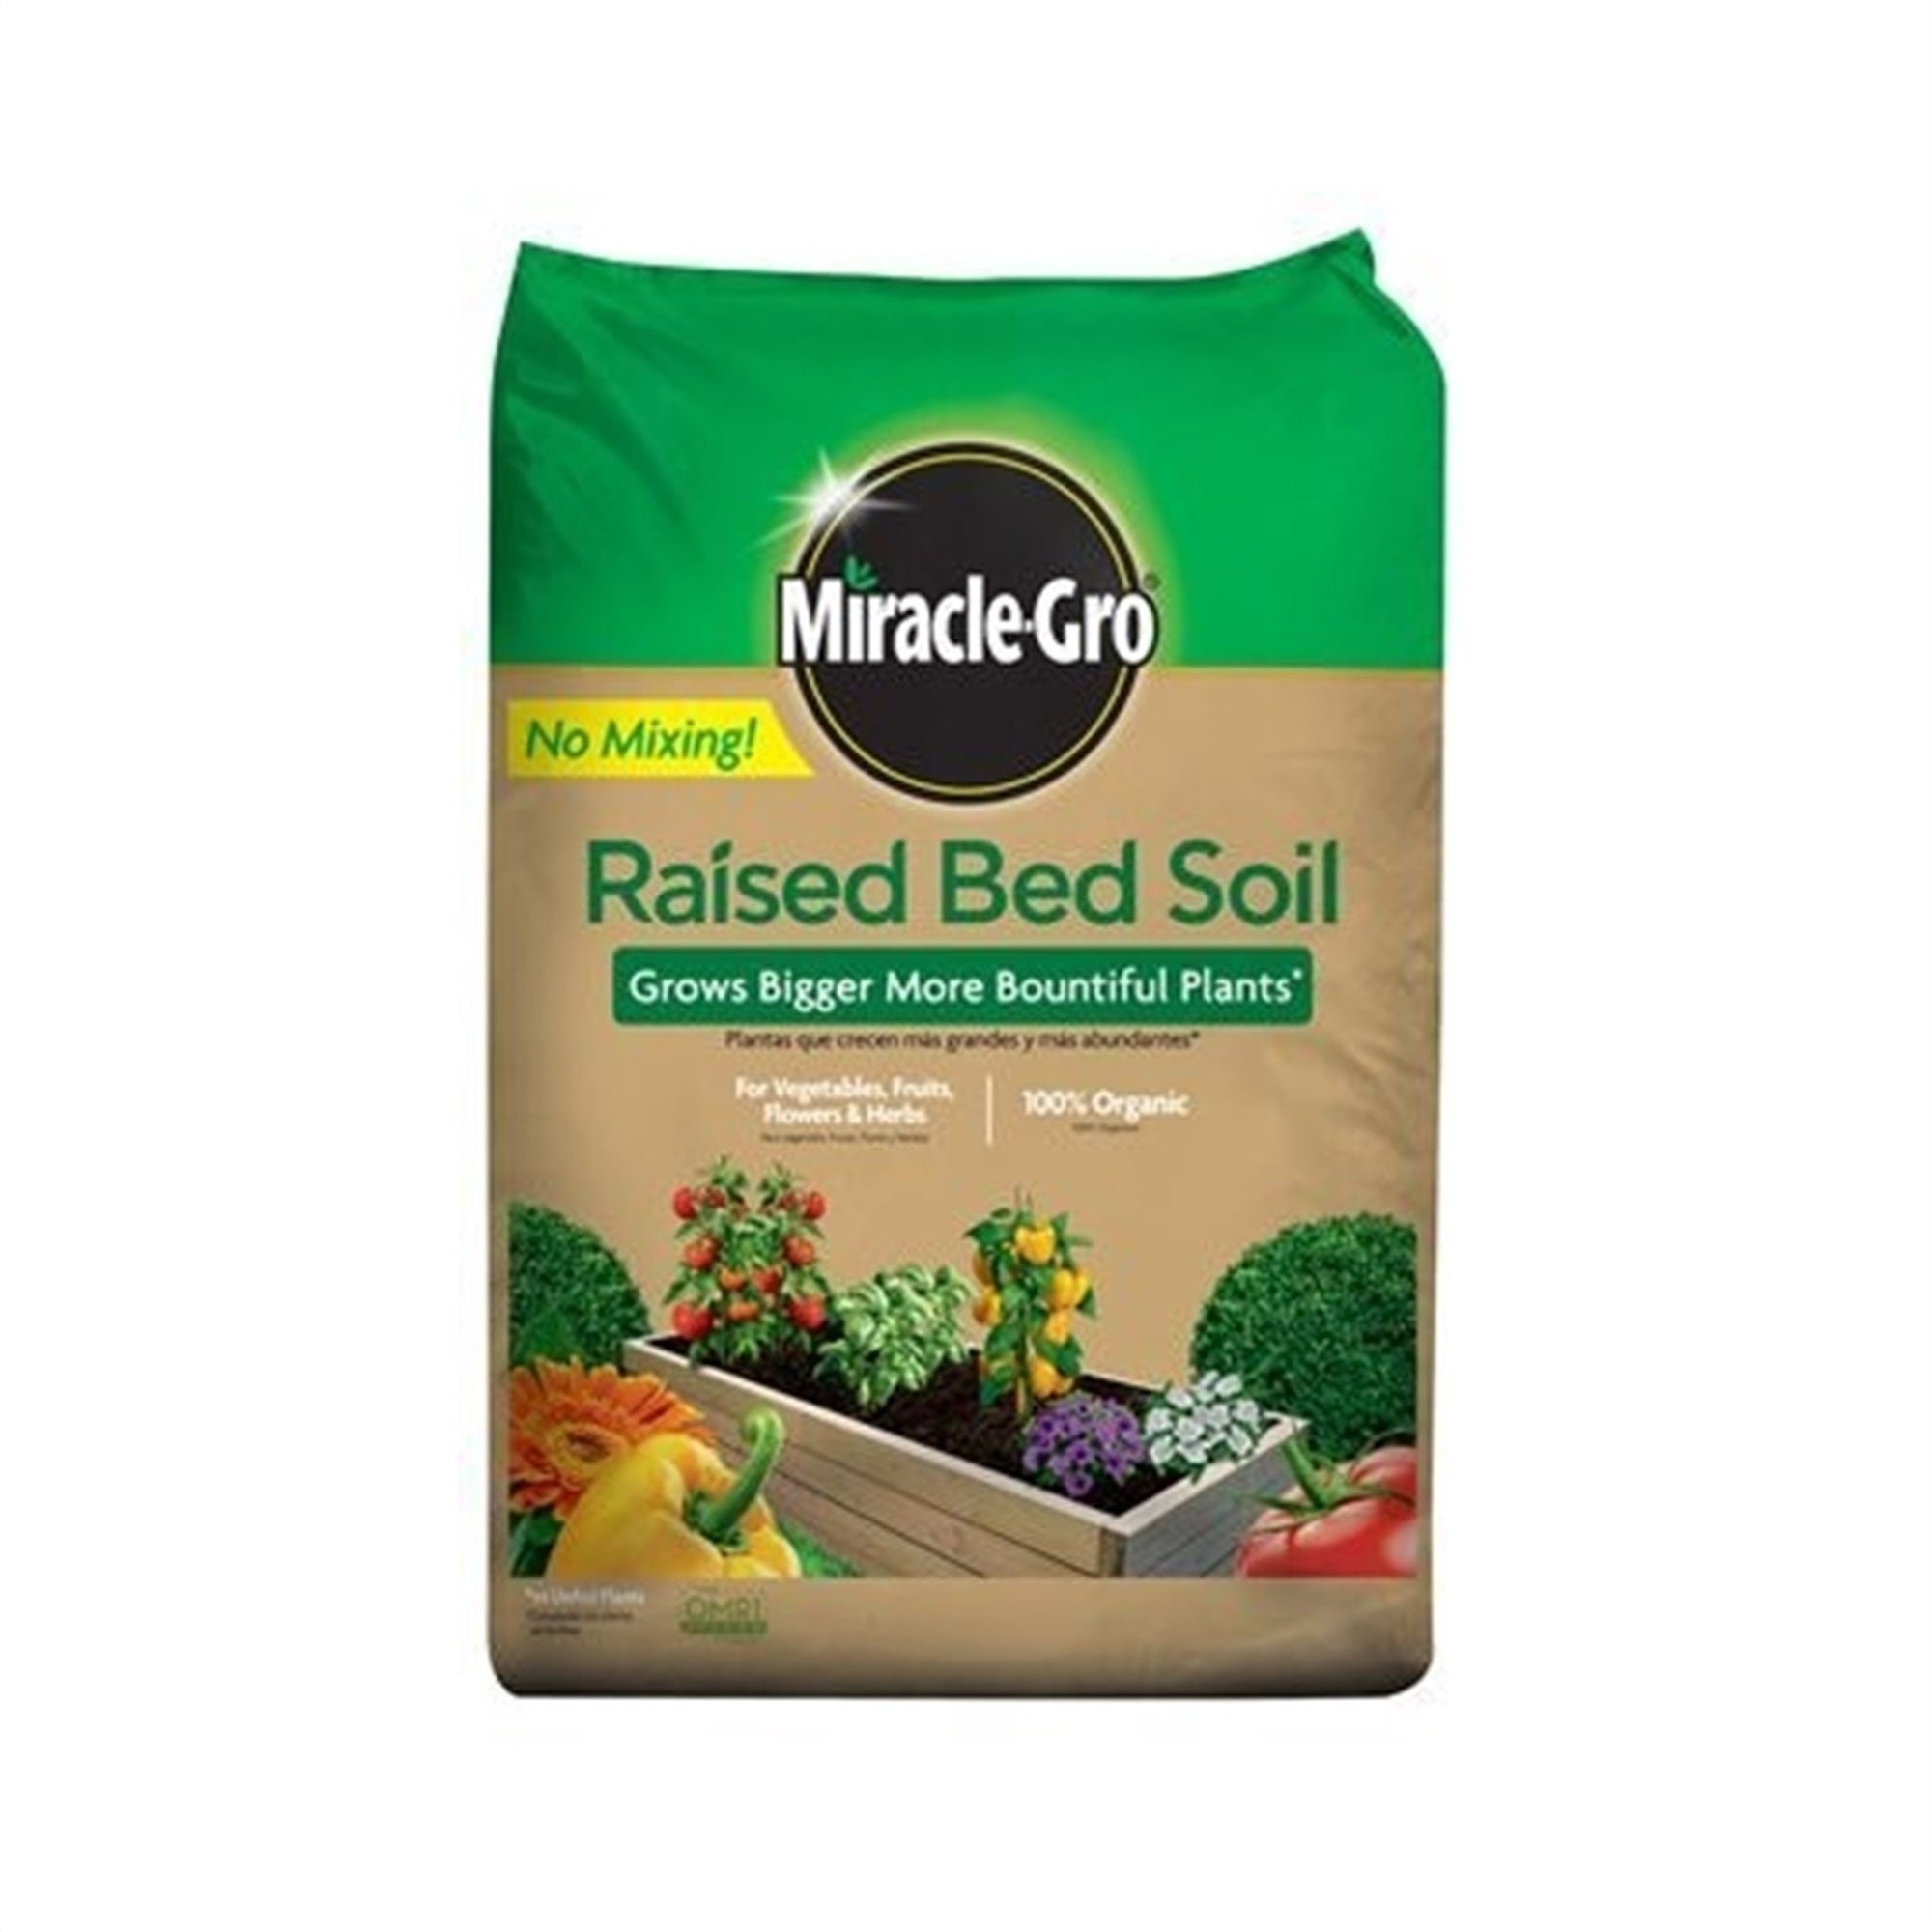 Miracle-gro Raised Bed Soil, 1.5cuft